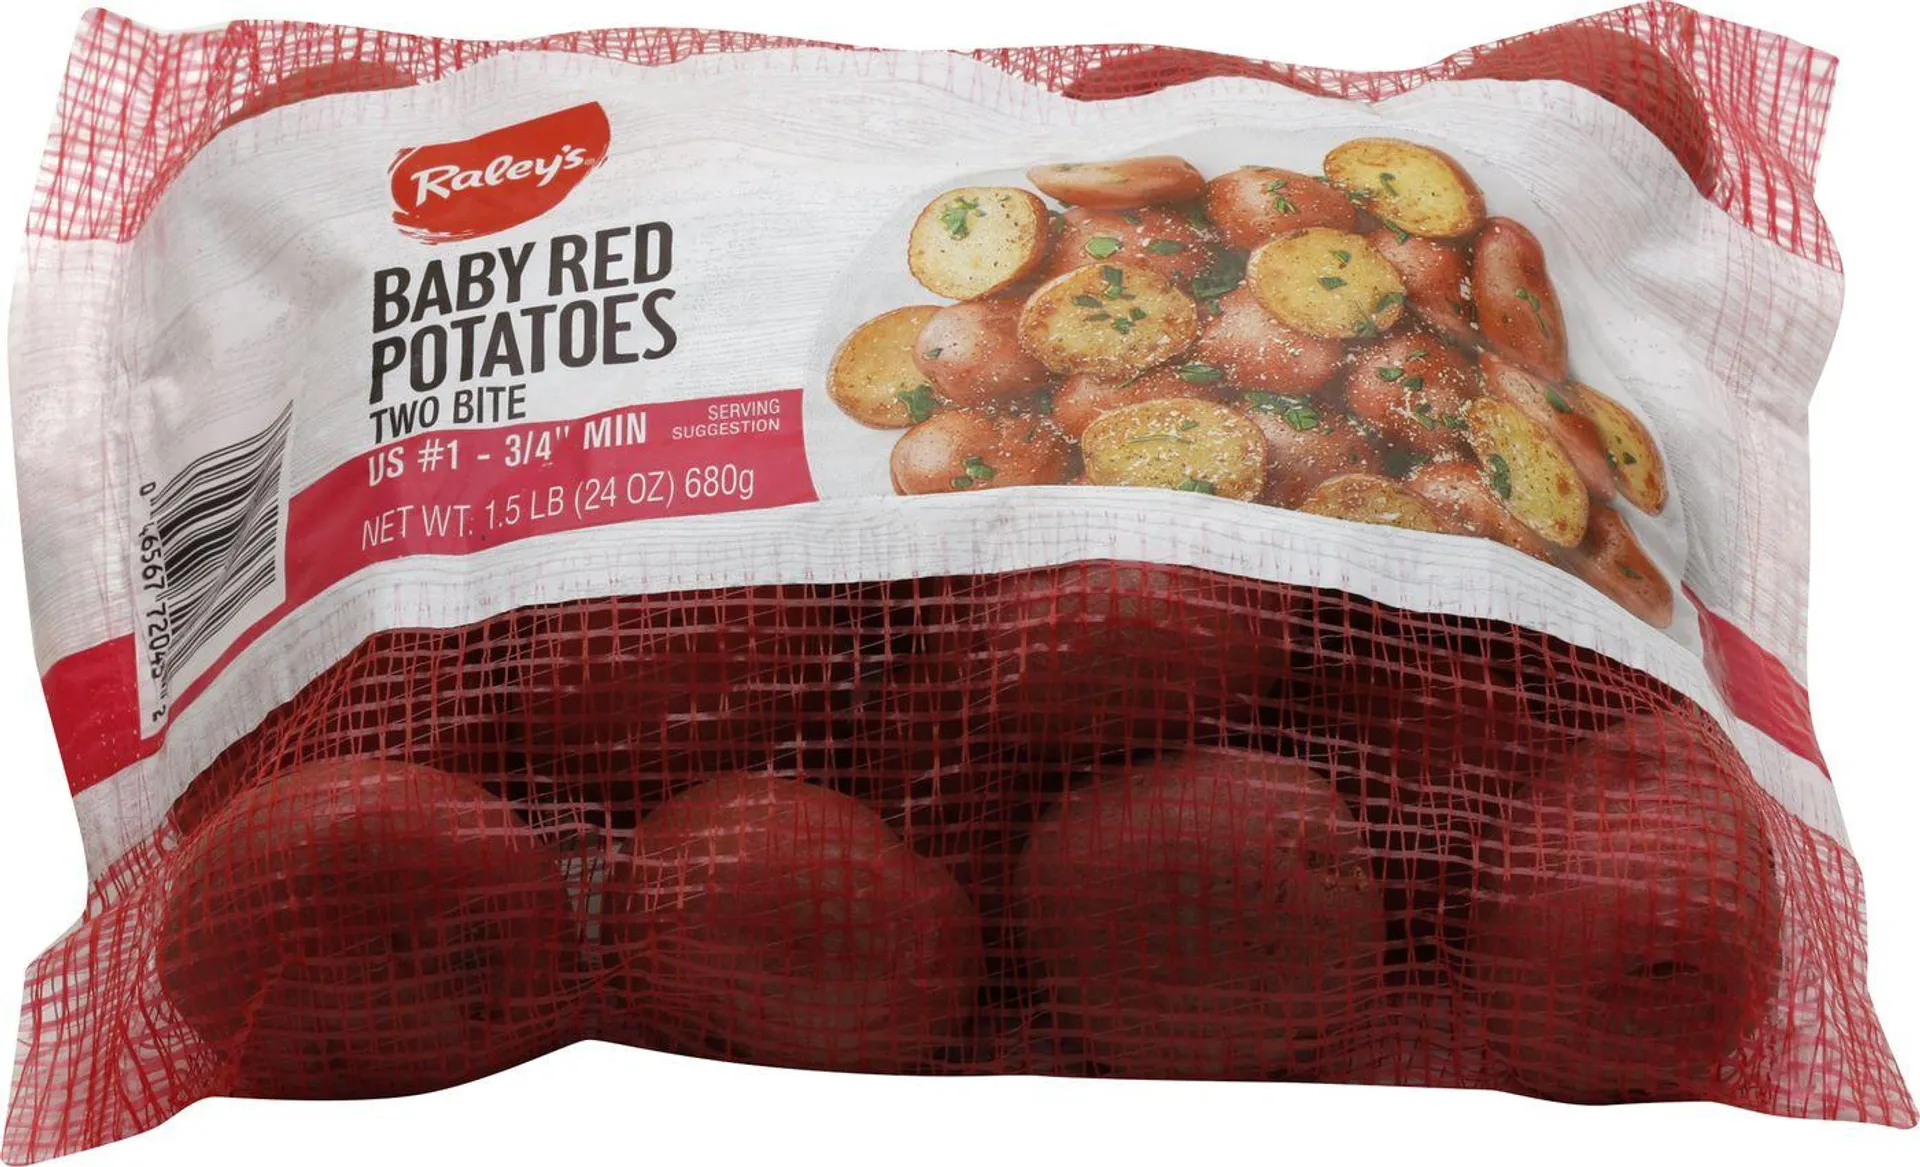 Raley's Baby Red Potatoes